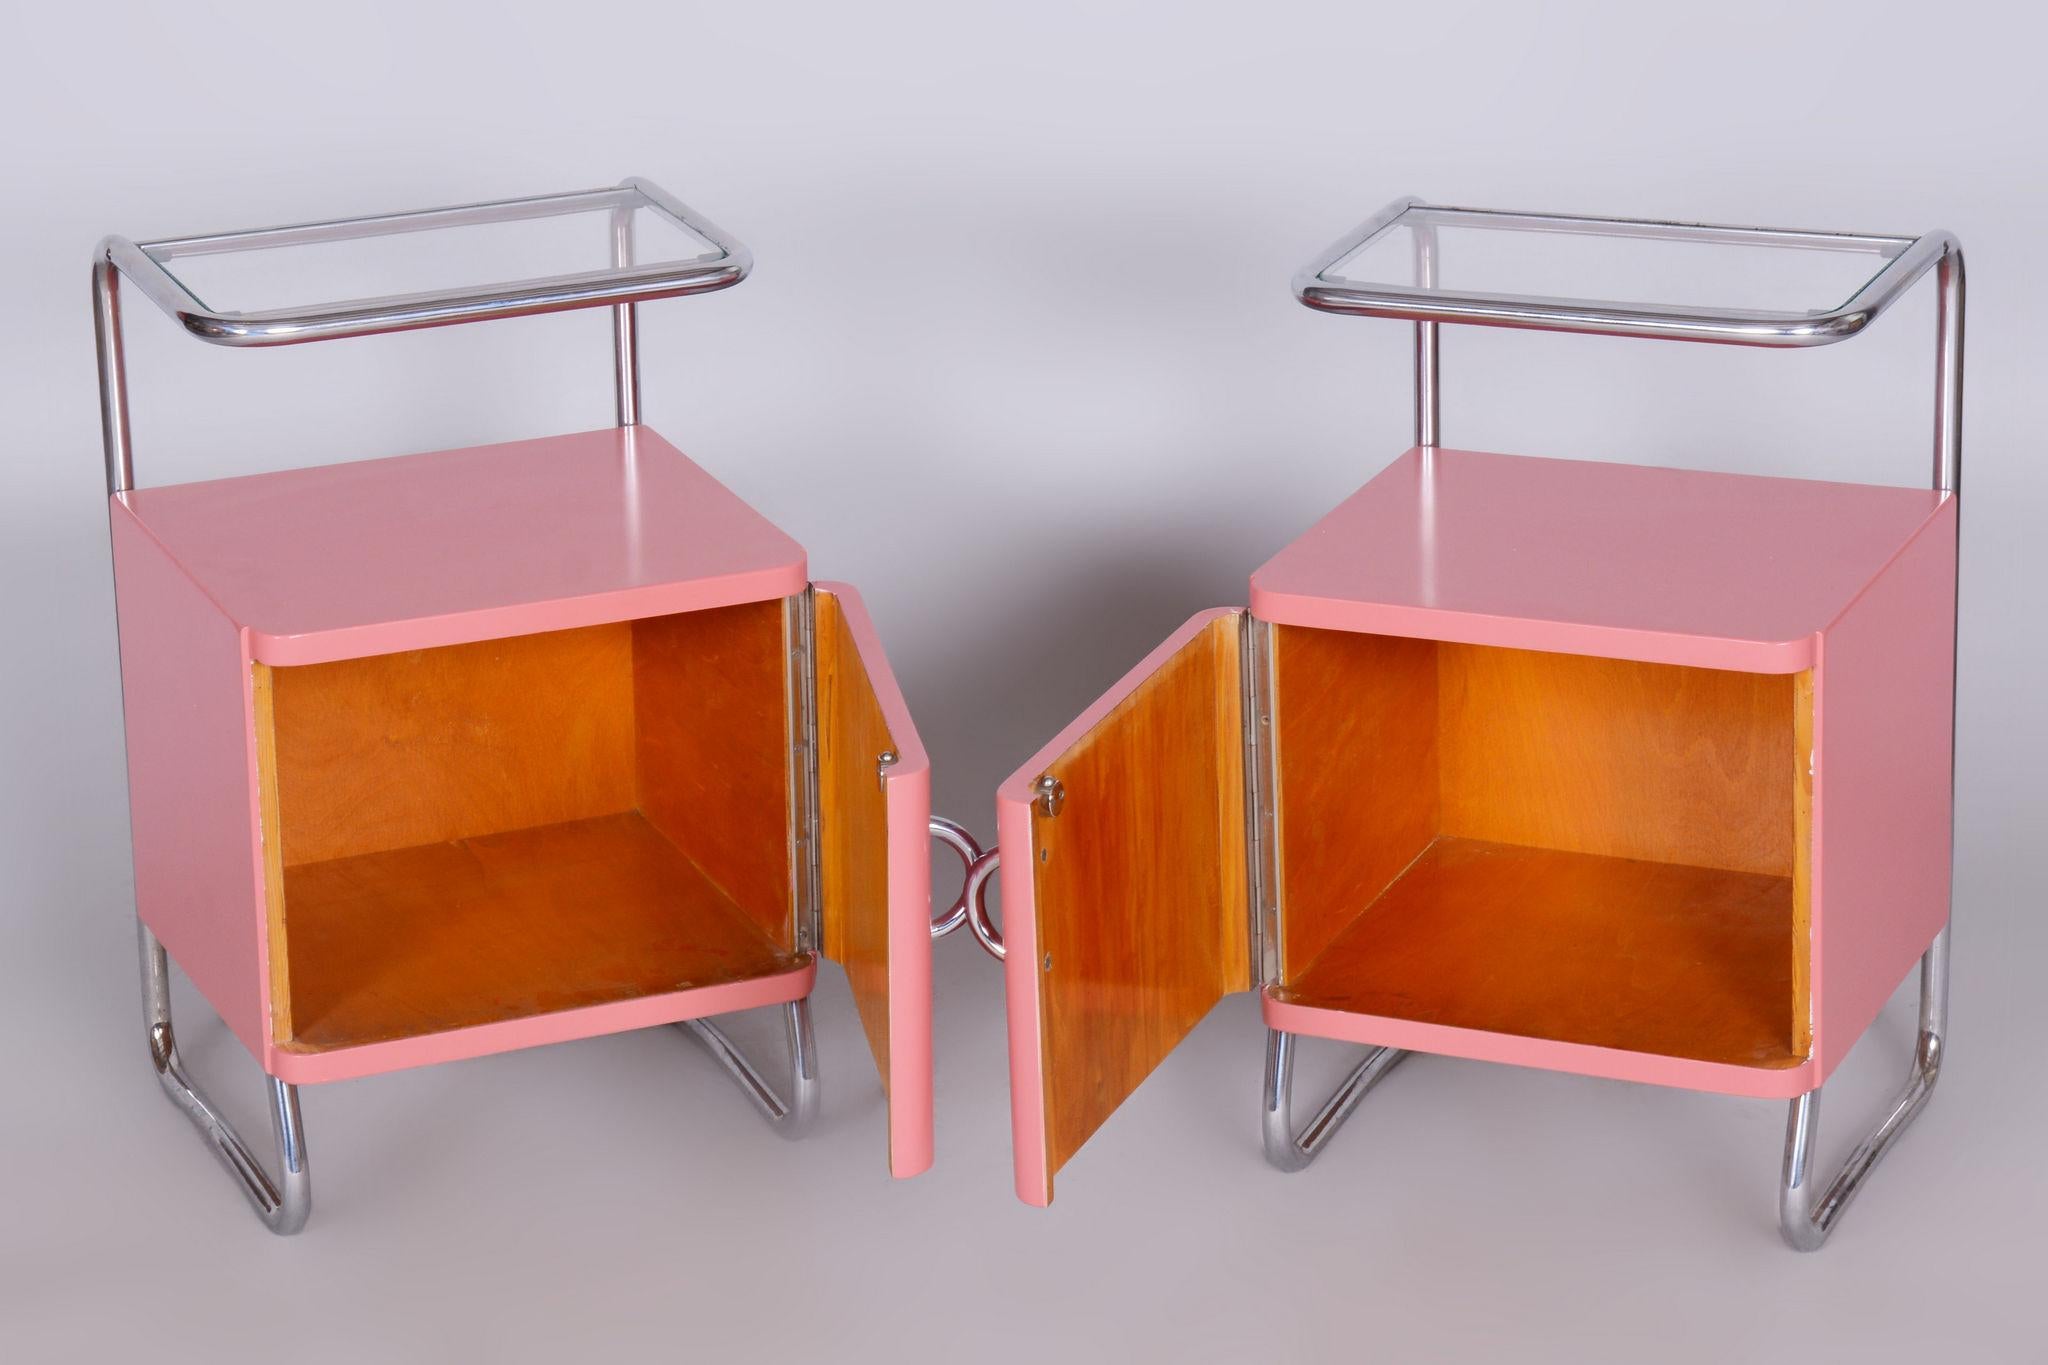 Restored Bauhaus Pair of Bed-Side Tables, Chrome-Plated Steel, Czechia, 1940s For Sale 5